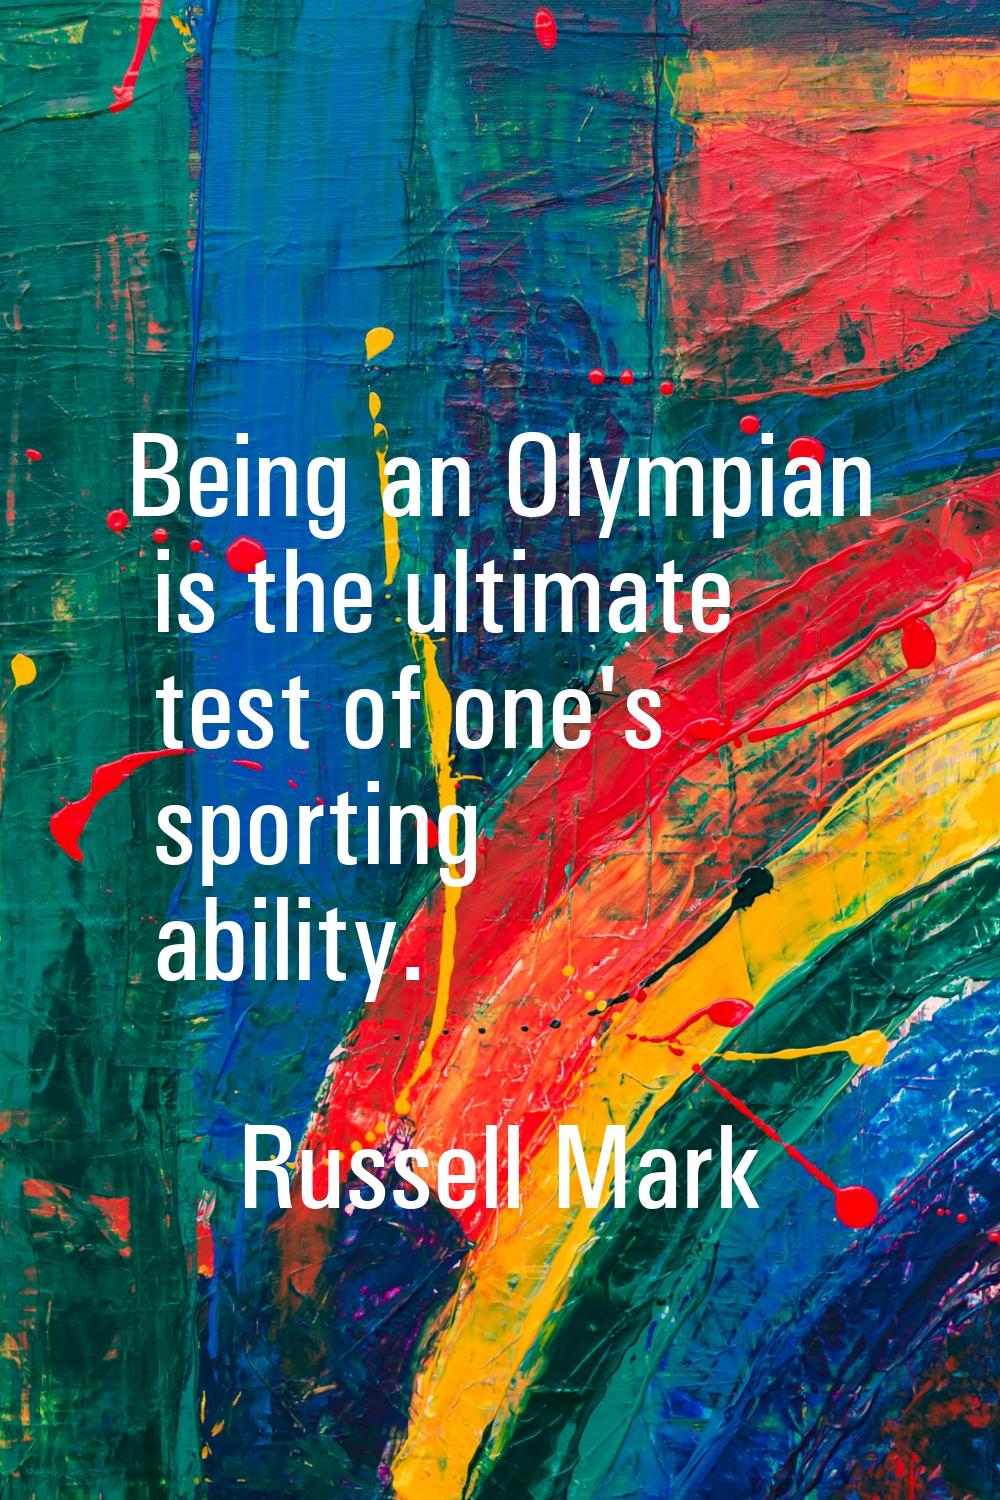 Being an Olympian is the ultimate test of one's sporting ability.